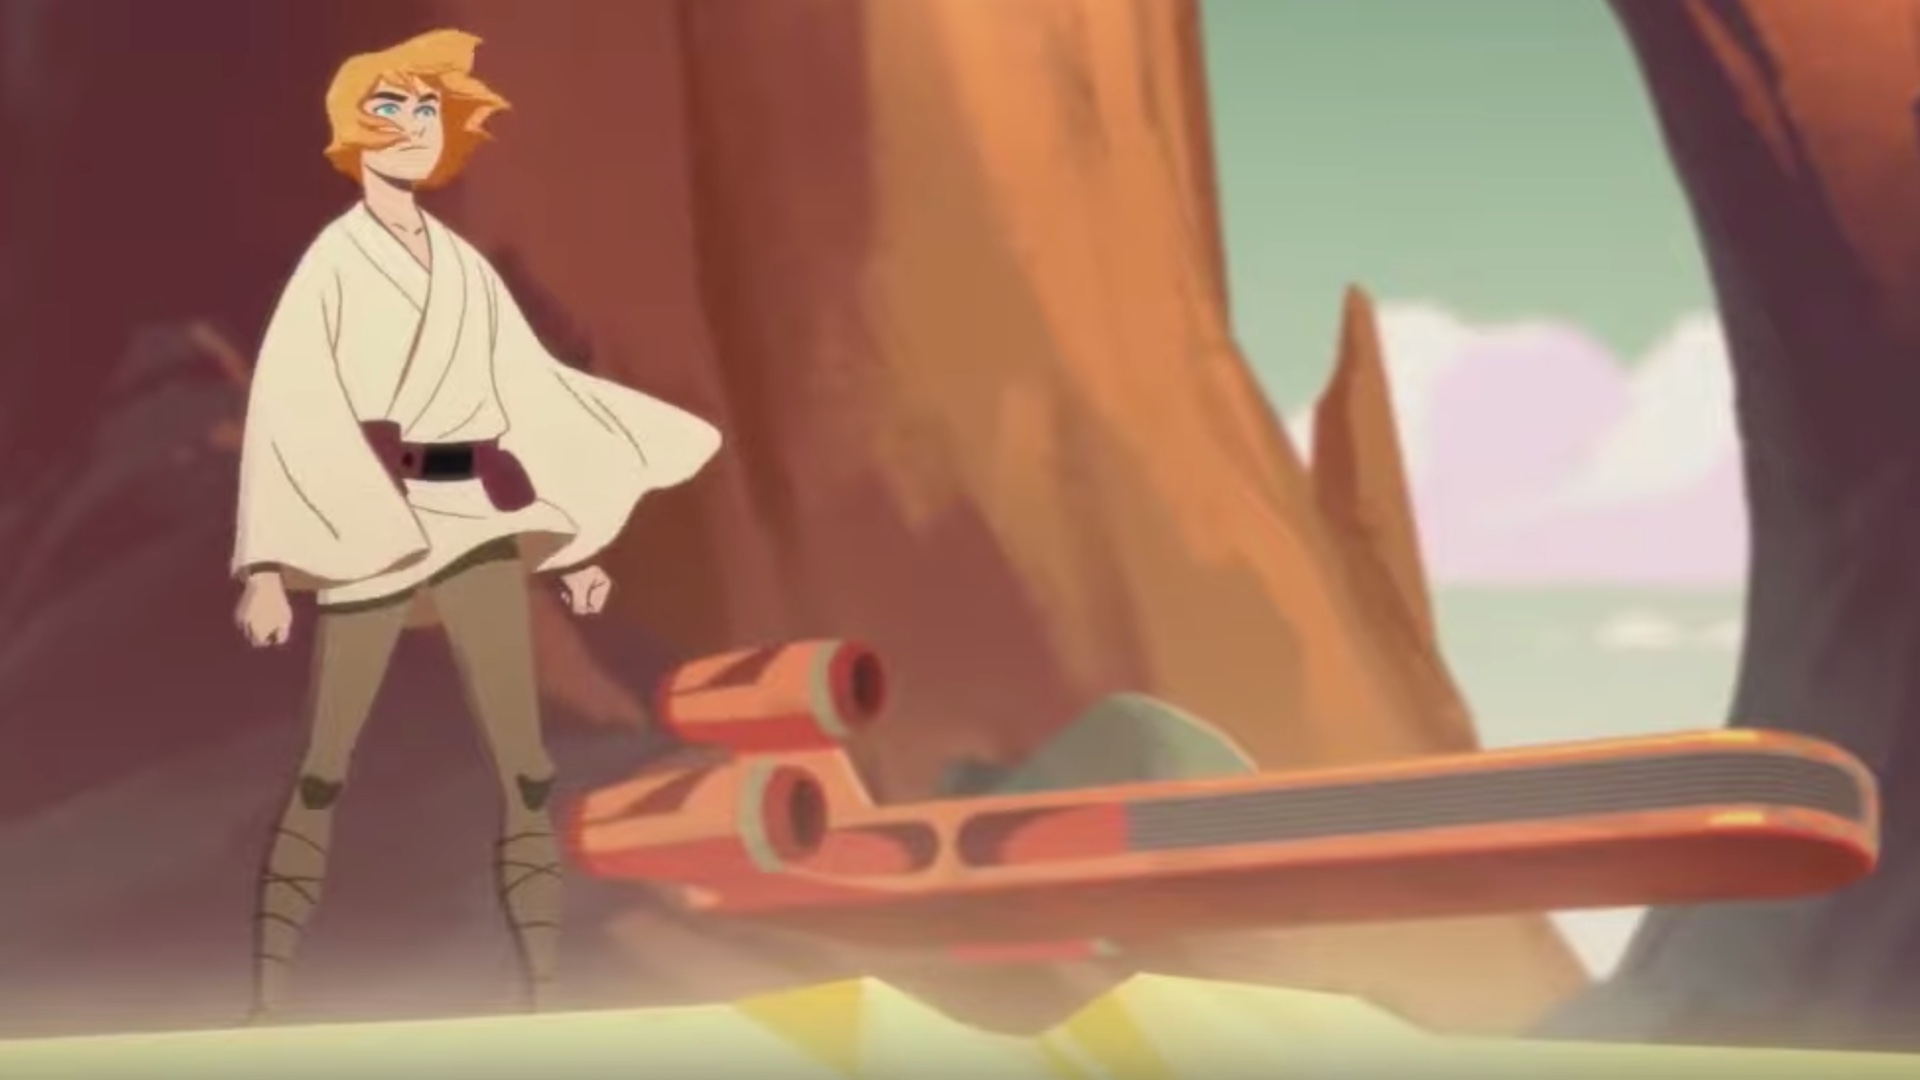 Fan-Made Anime Openings For The Original STAR WARS Trilogy Using GALAXY OF  ADVENTURES — GeekTyrant